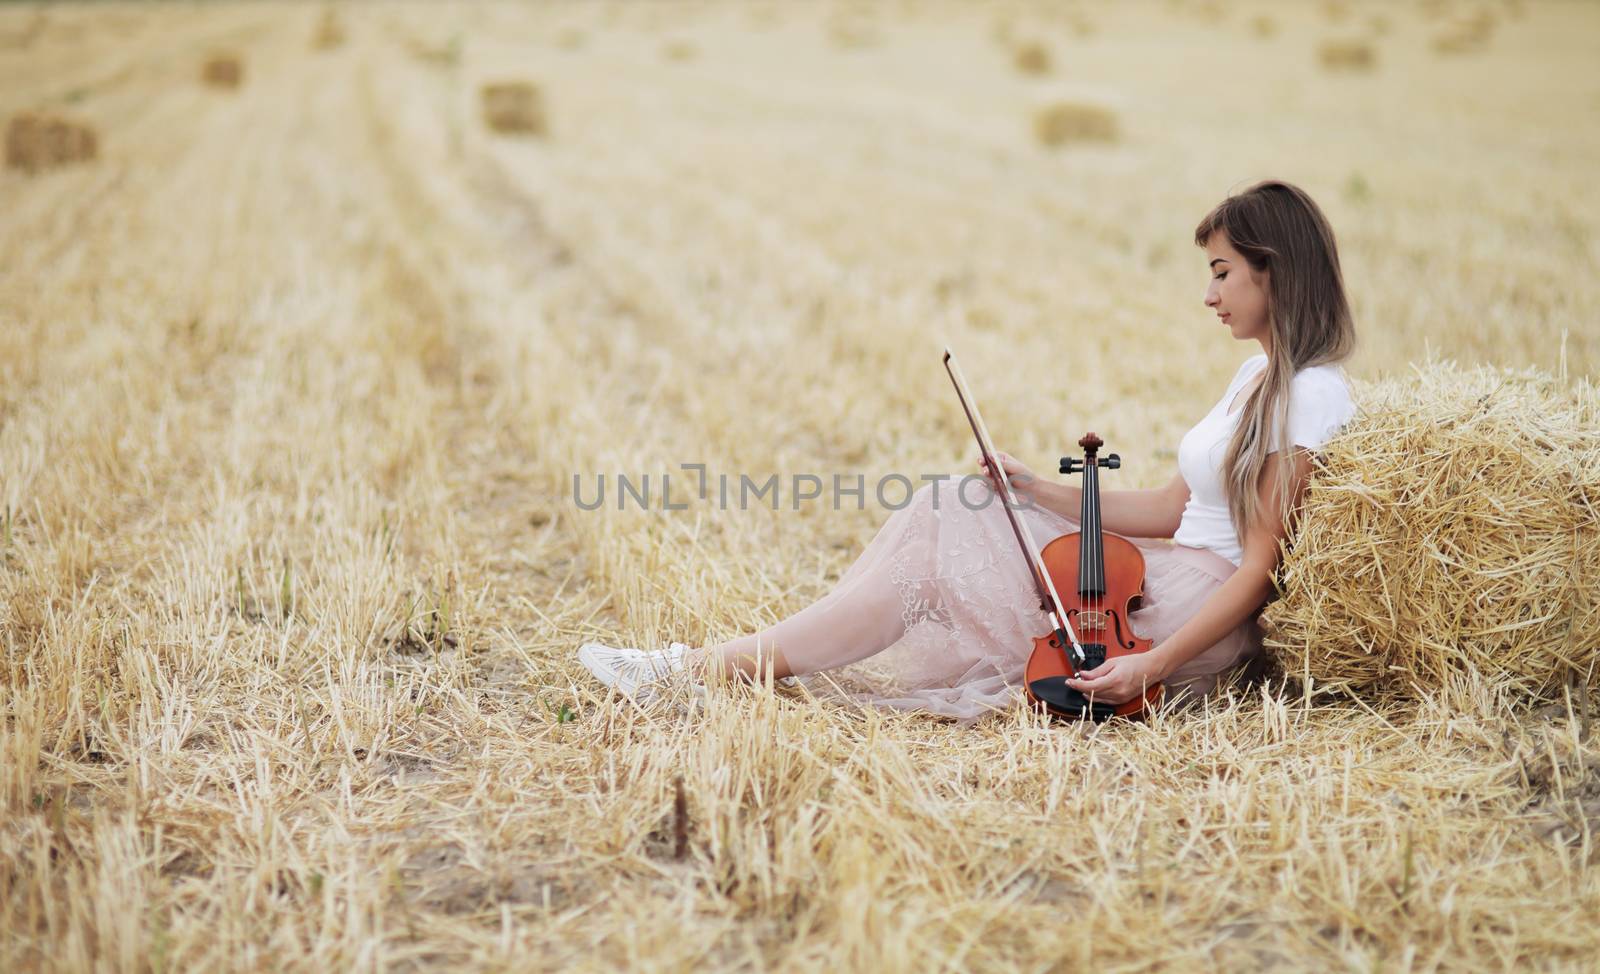 Romantic young woman with flowing hair, holding a violin in her hand in a field after harvest. Square sheaves of hay in the field. Violin training